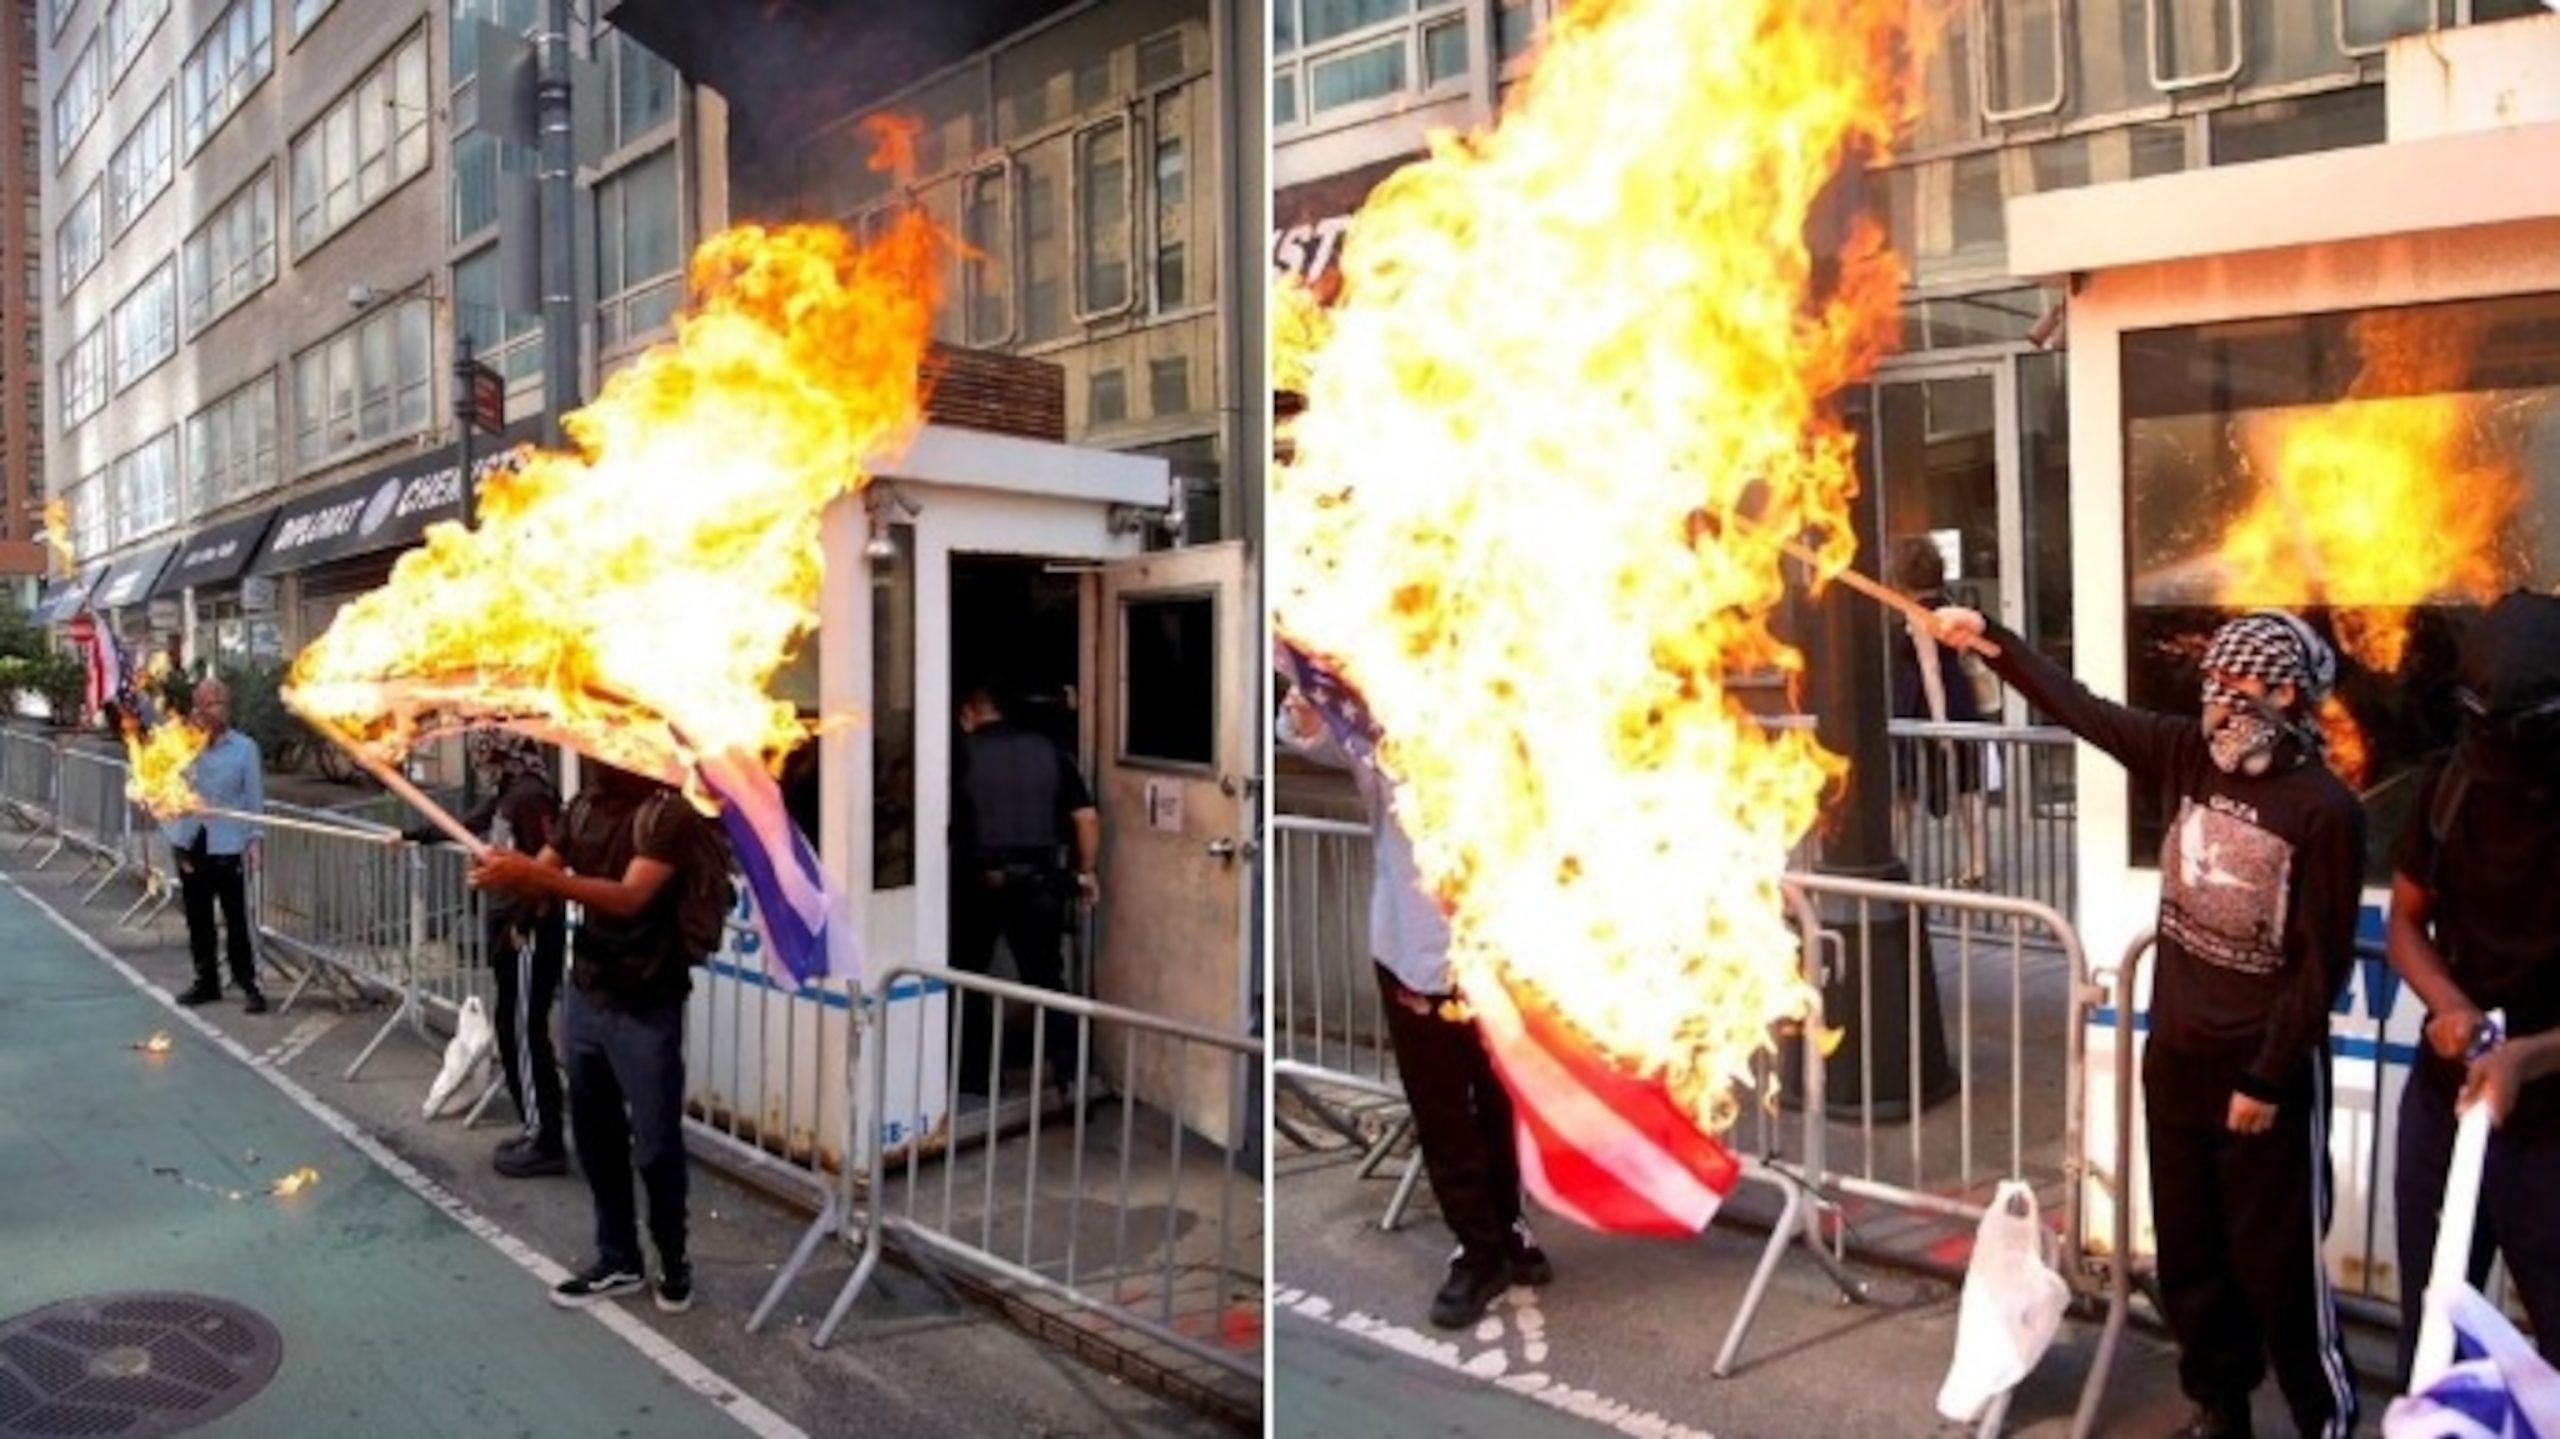 One person arrested and two suspects remain at large for burning American and Israeli flags outside the Israeli consulate in New York